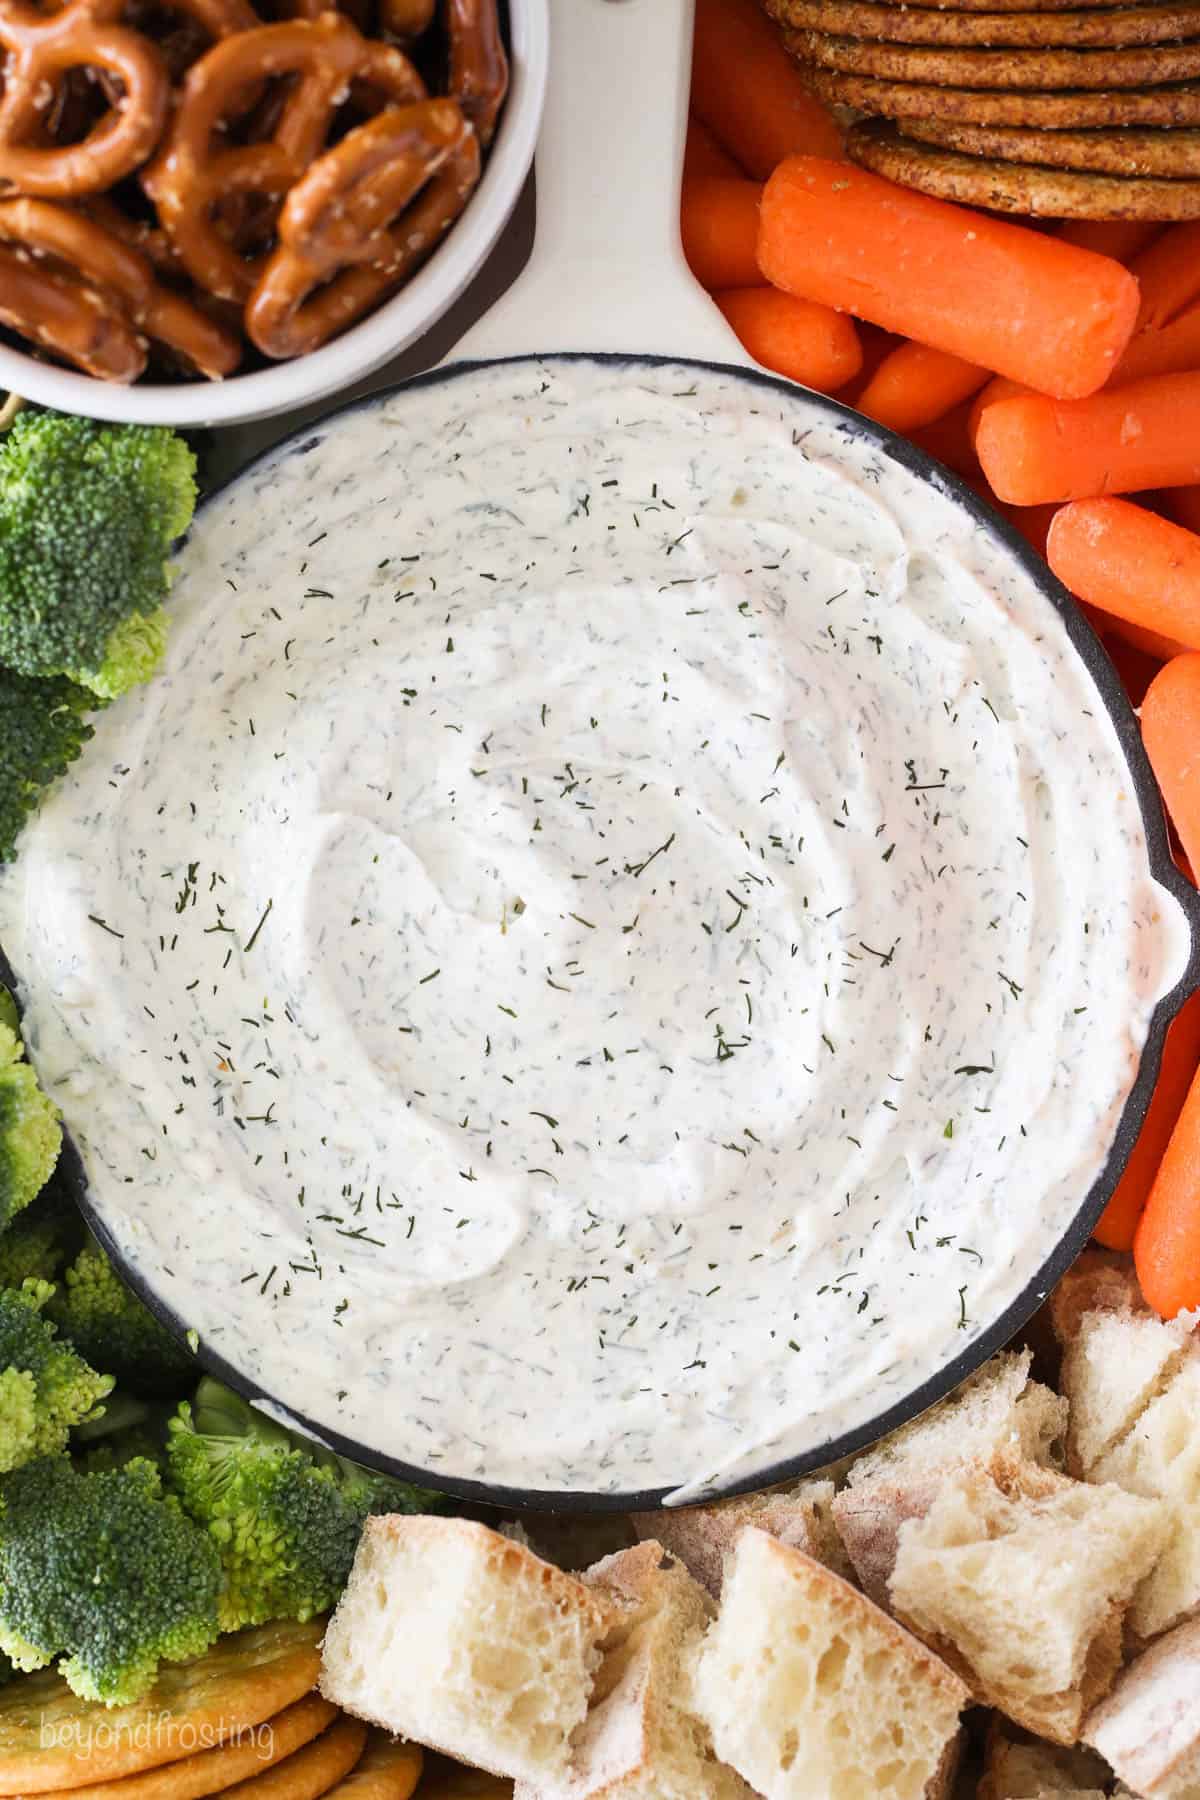 Overhead view of a bowl of dill dip next to veggies and bread